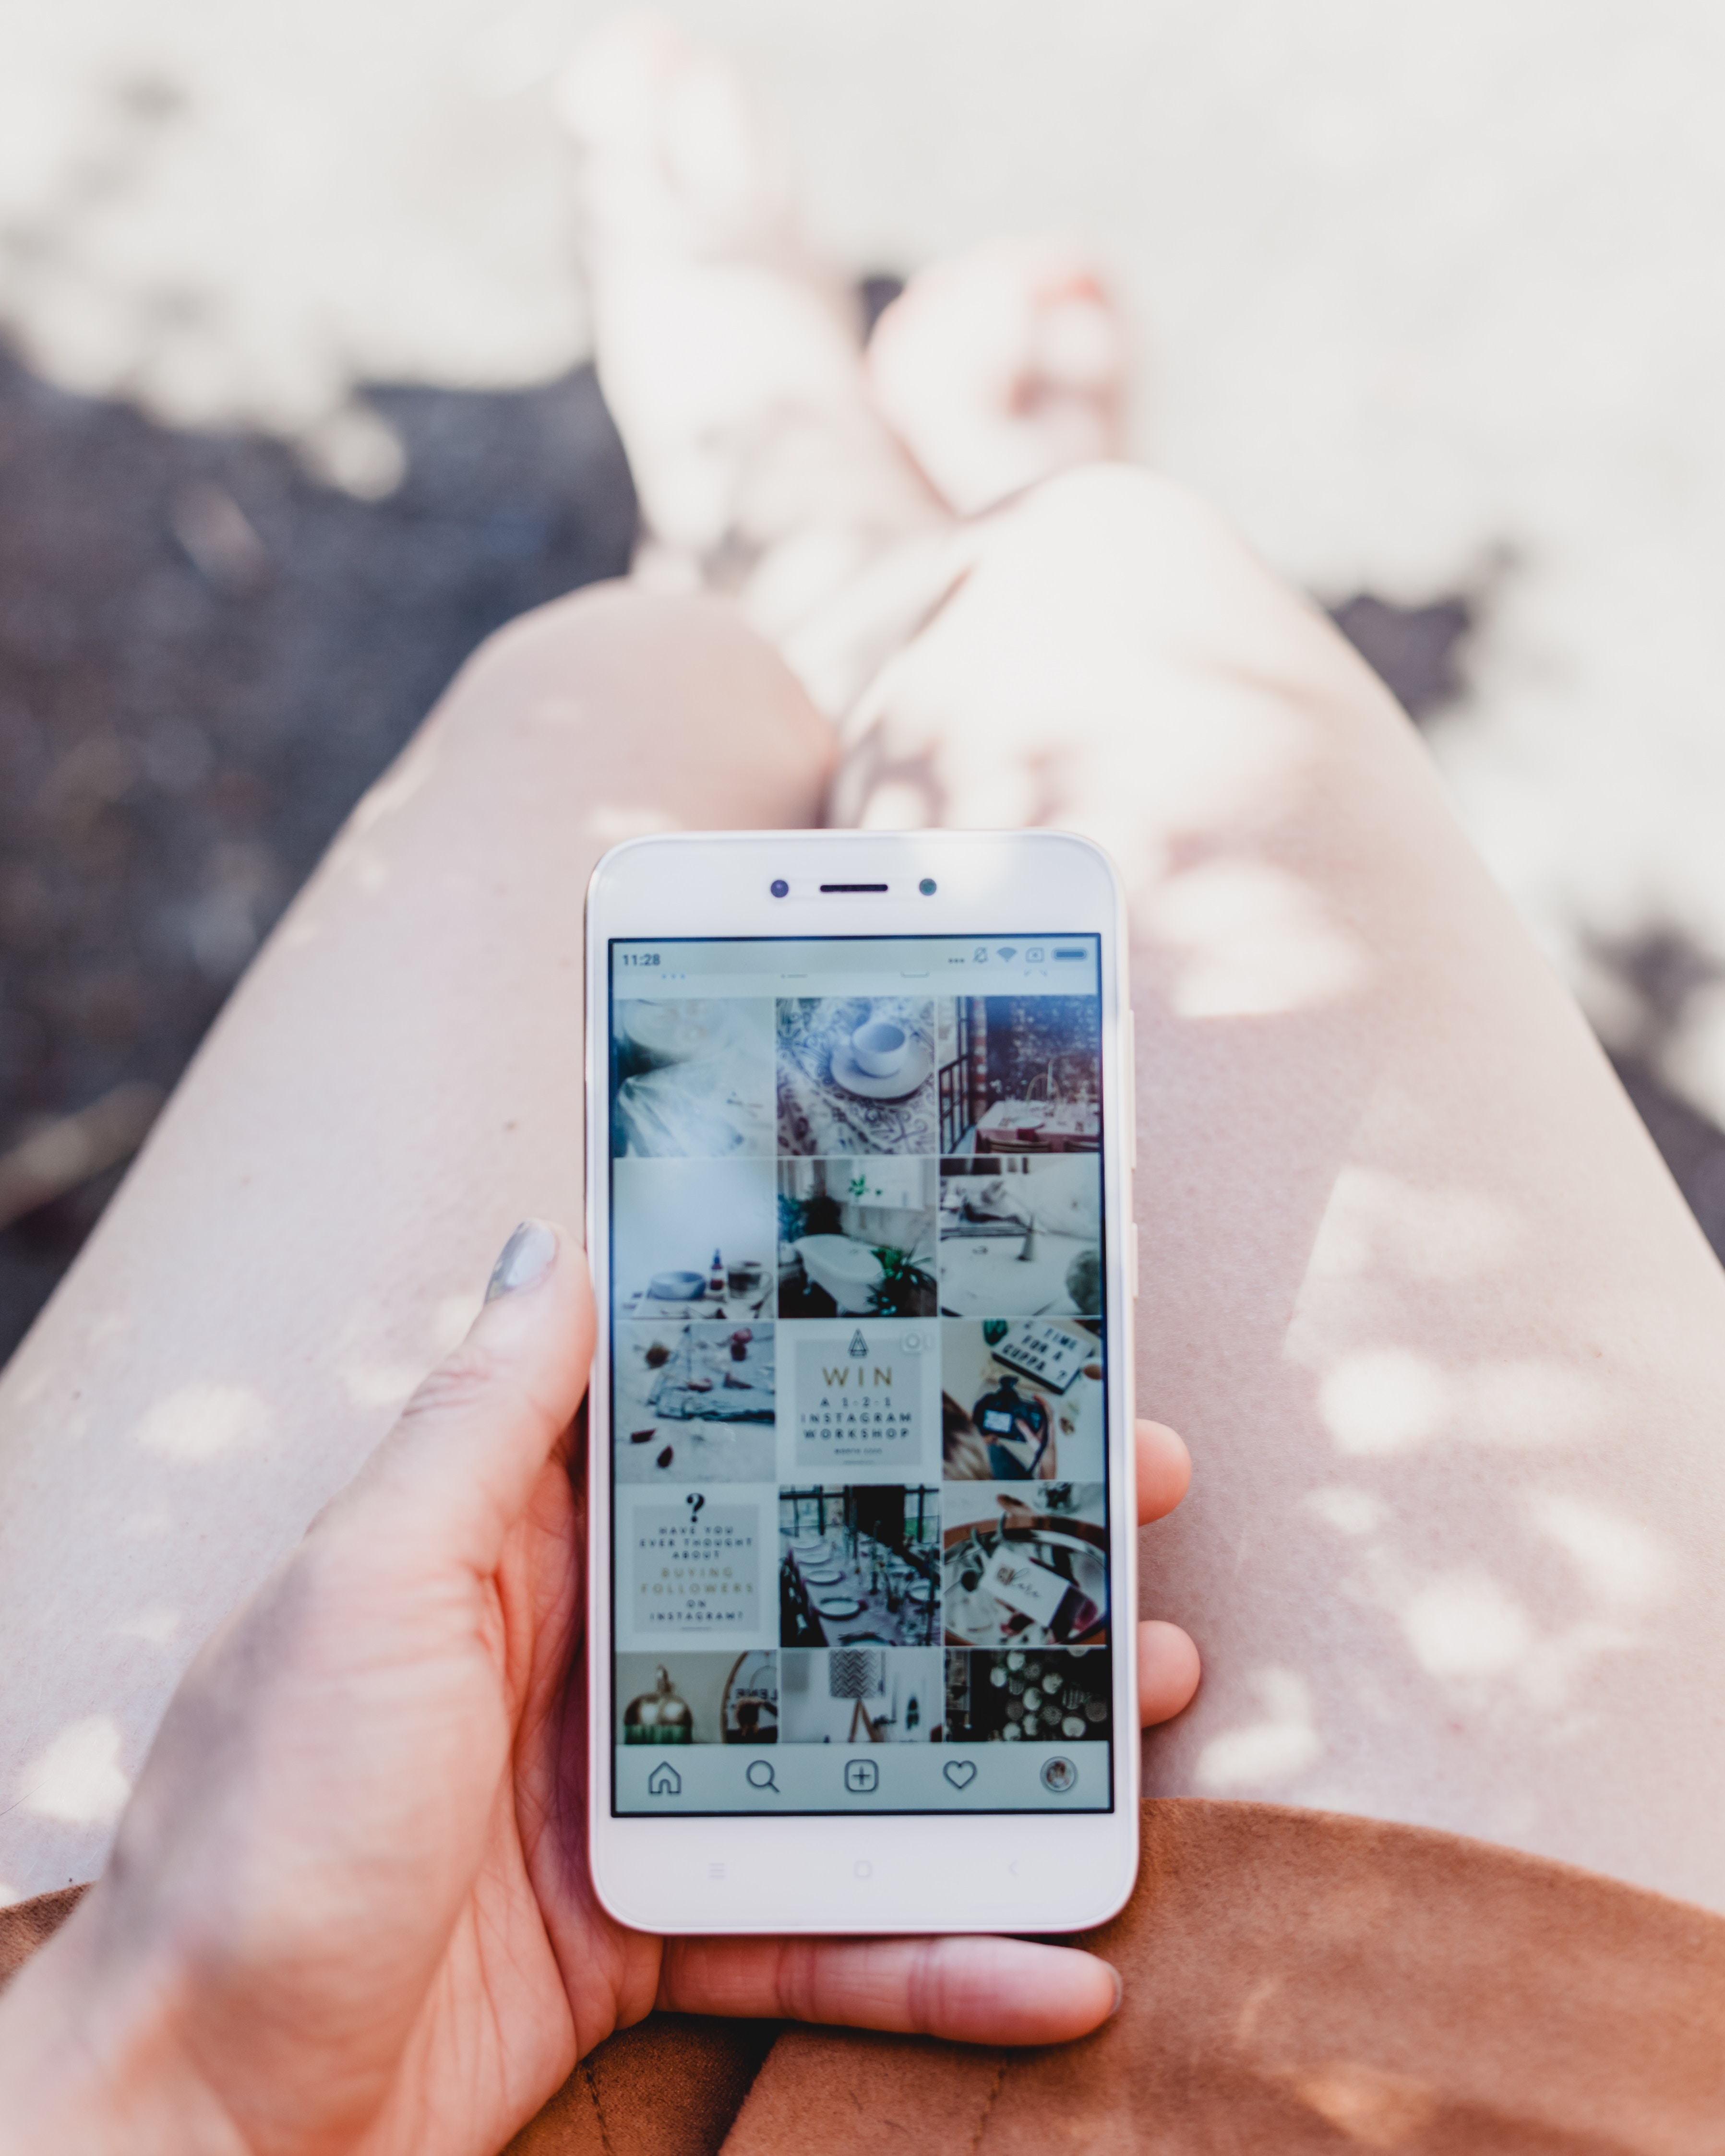 Use these apps to get IG followers